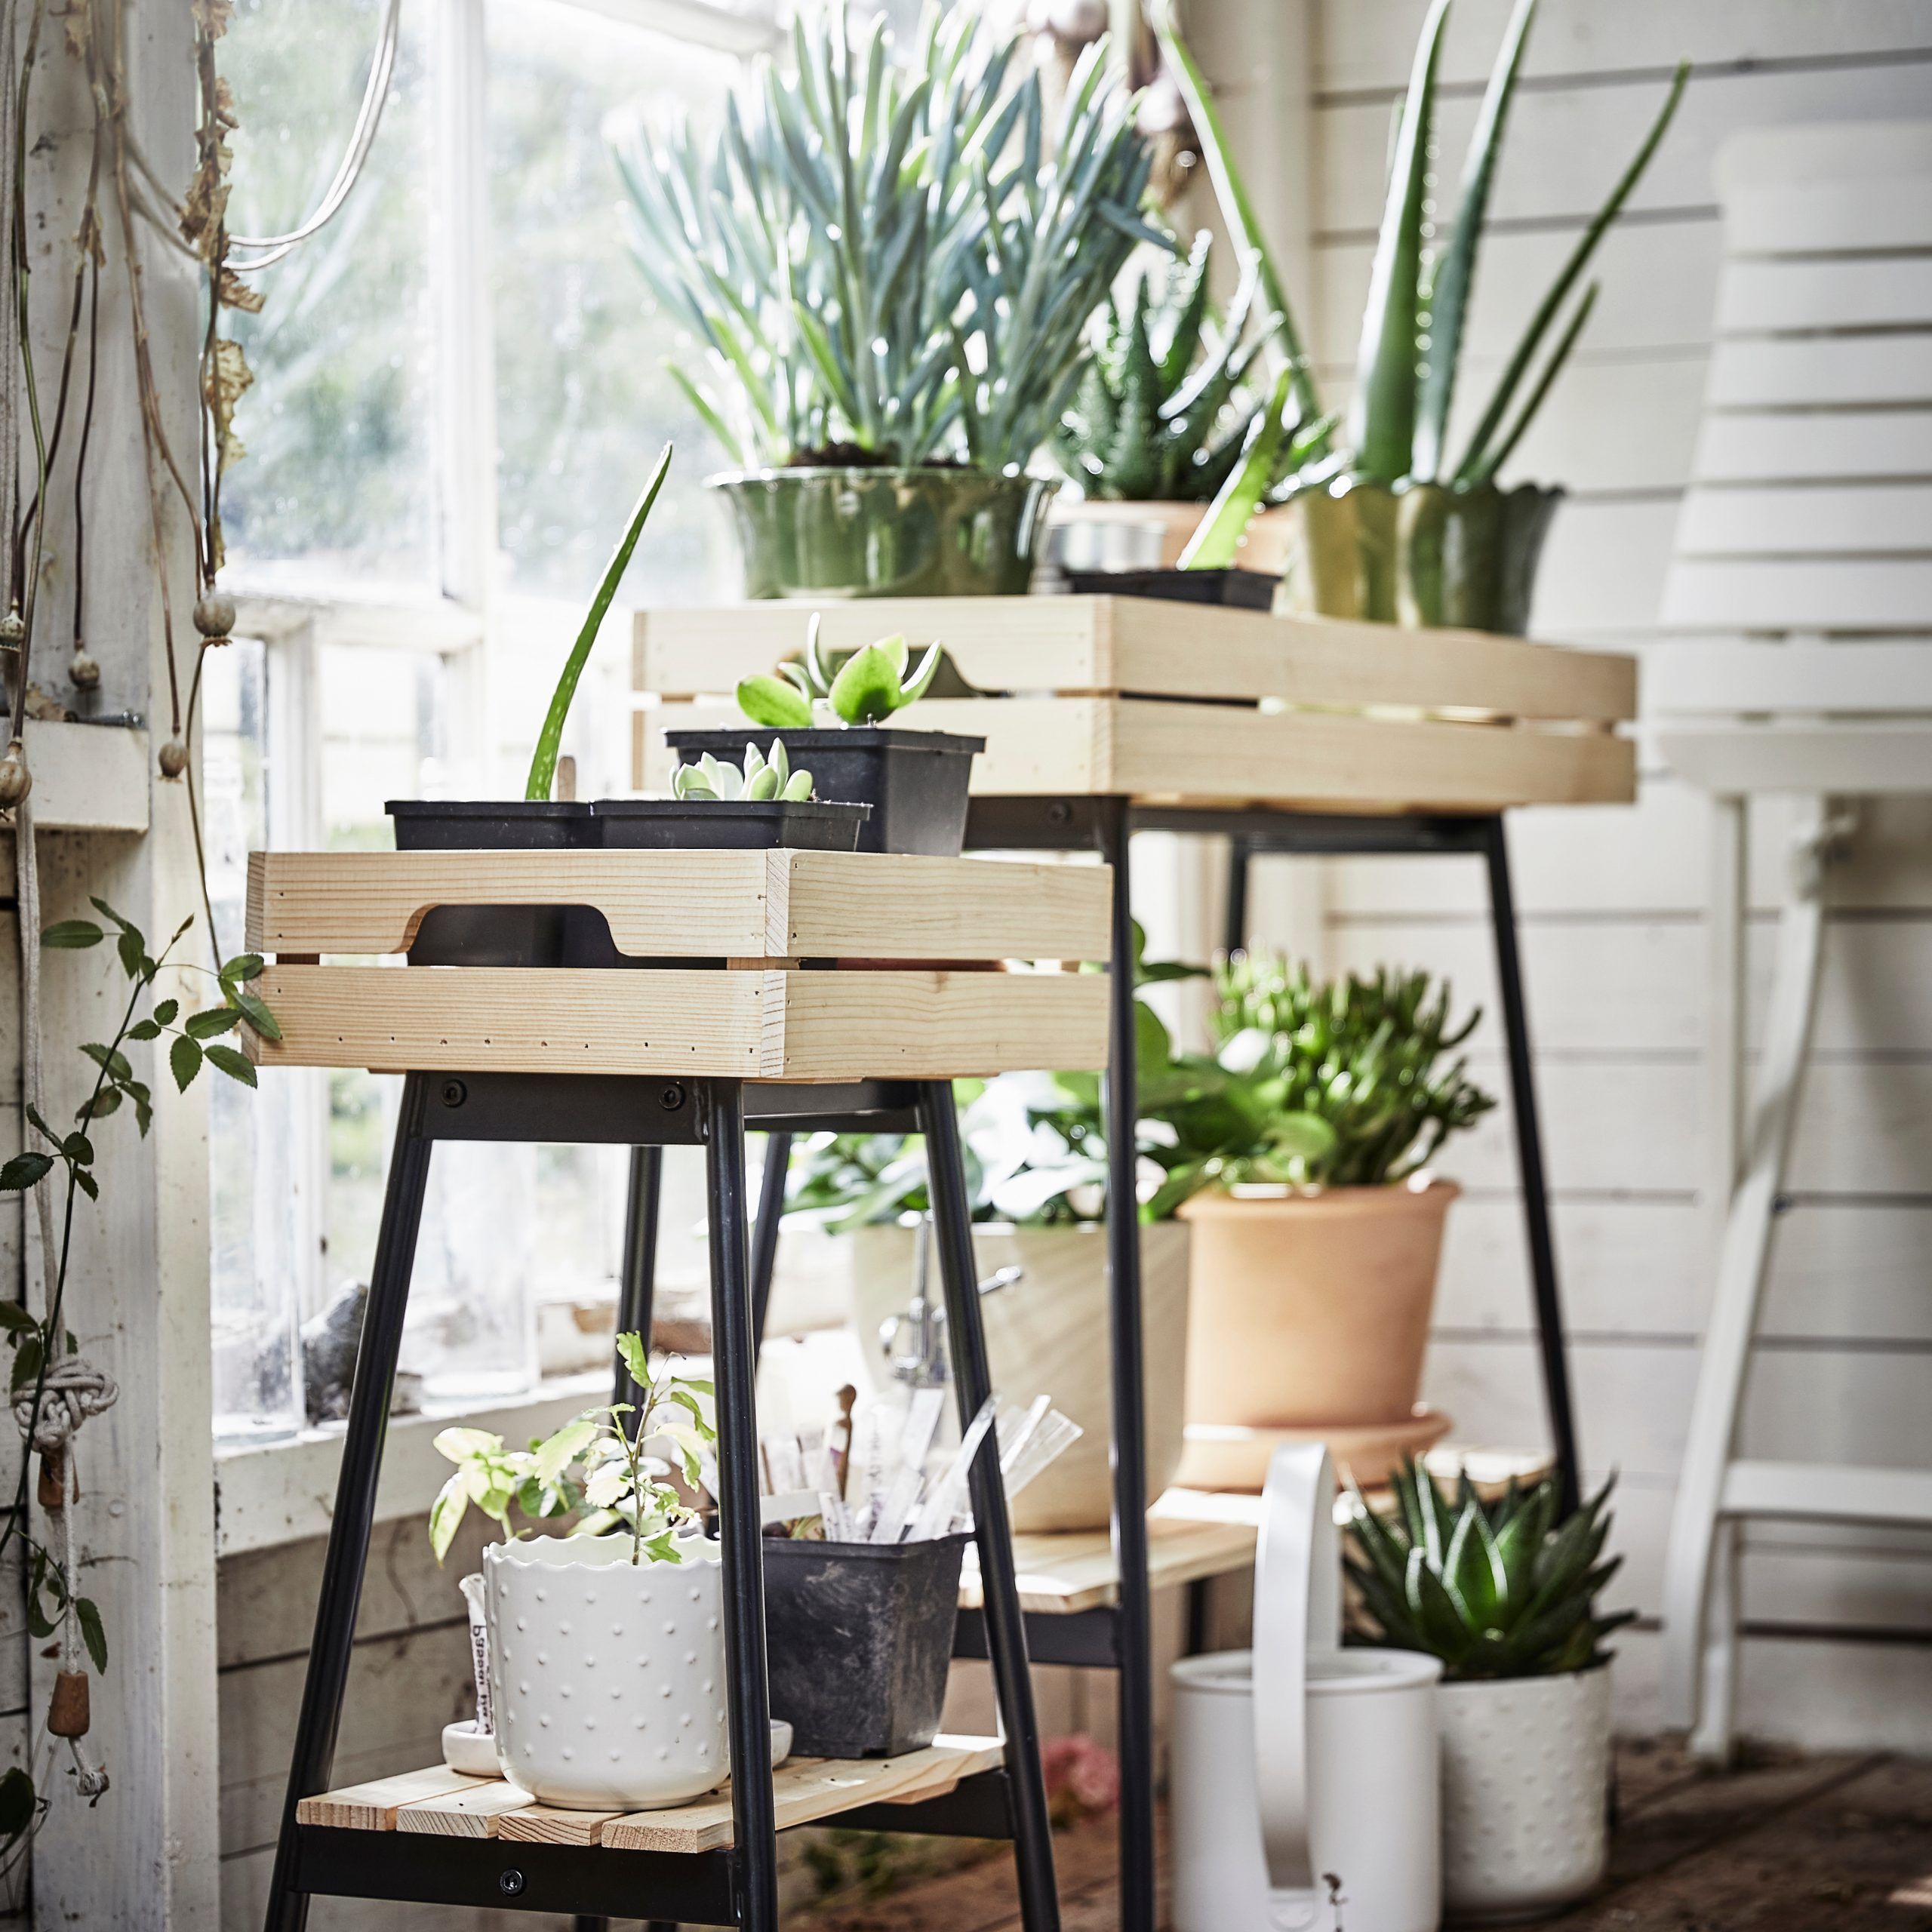 A Sturdy Plant Stand For Your Green Companions – Ikea Inside Current Green Plant Stands (View 5 of 15)